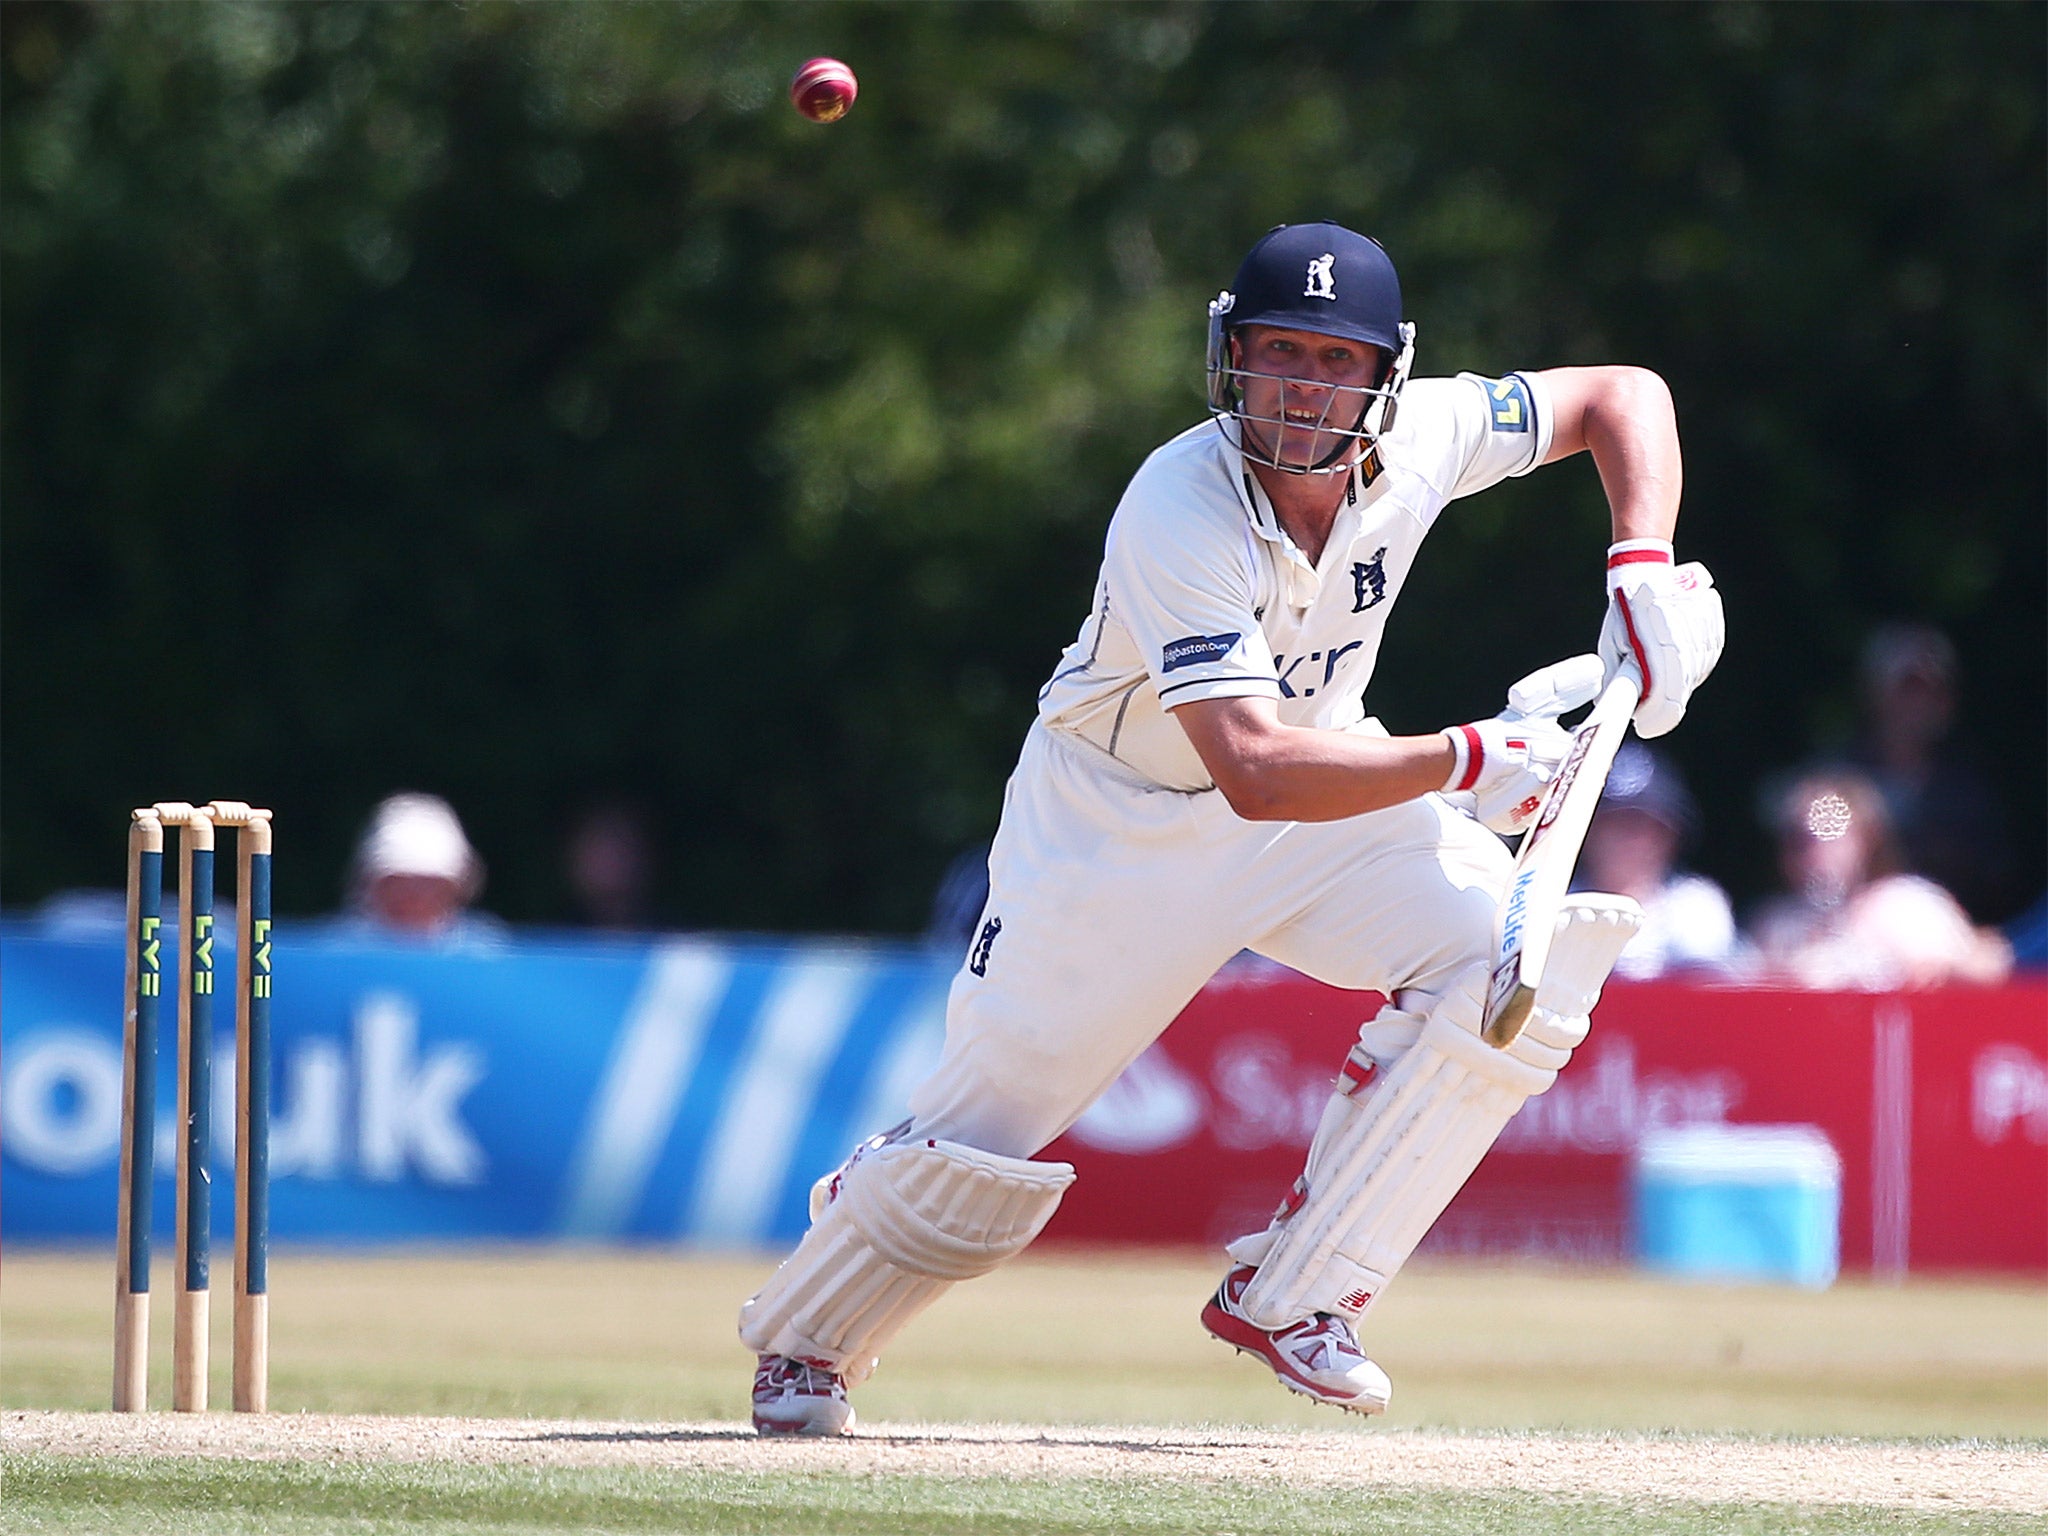 Jonathan Trott plays a shot during a match against Sussex in July